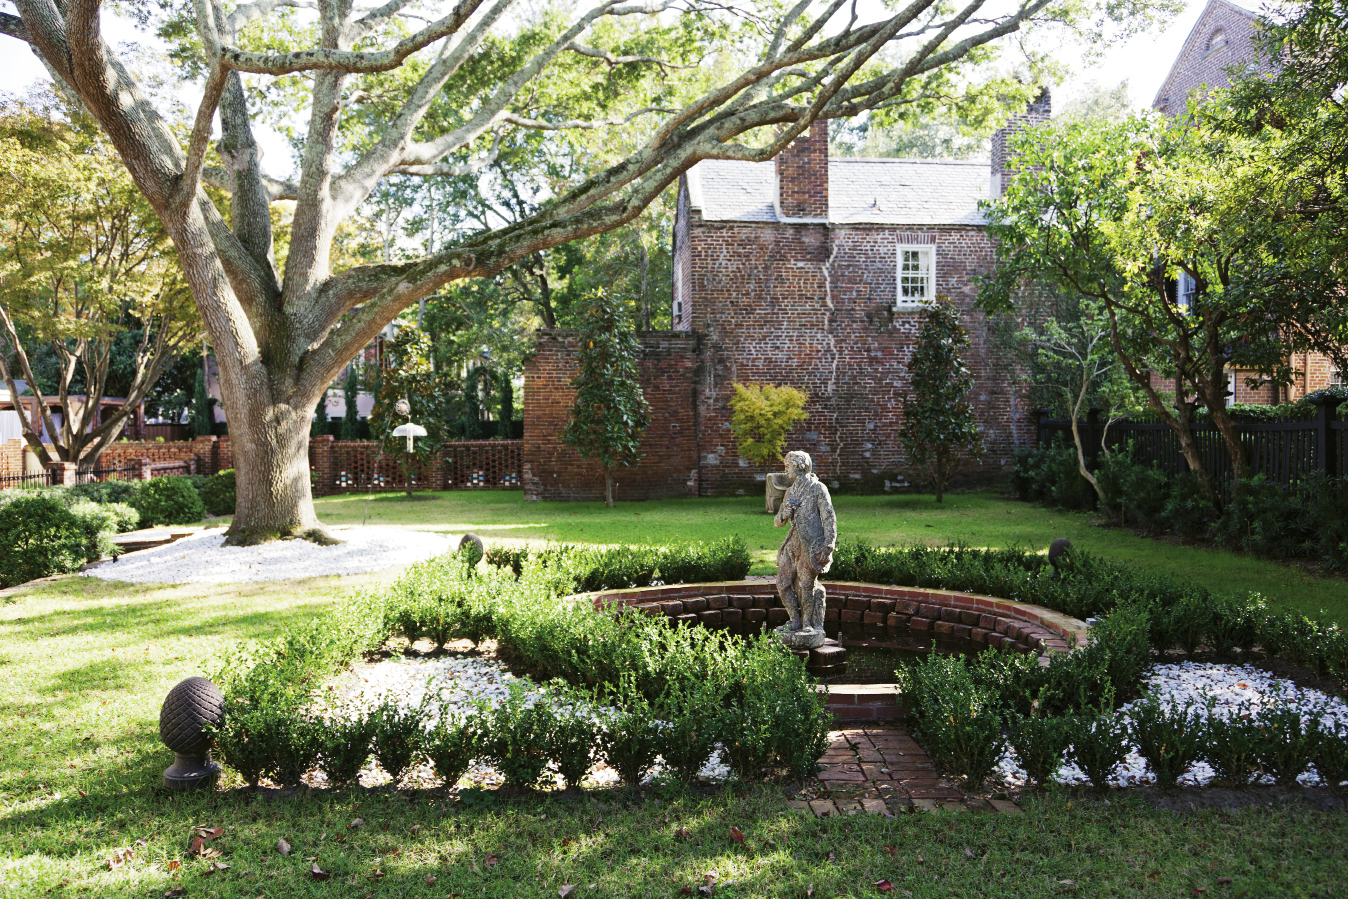 The original owner also purchased the  adjacent lot to house a garden; the courtyard, punctuated by a stately live oak and a French statue, is protected by a conservation easement.